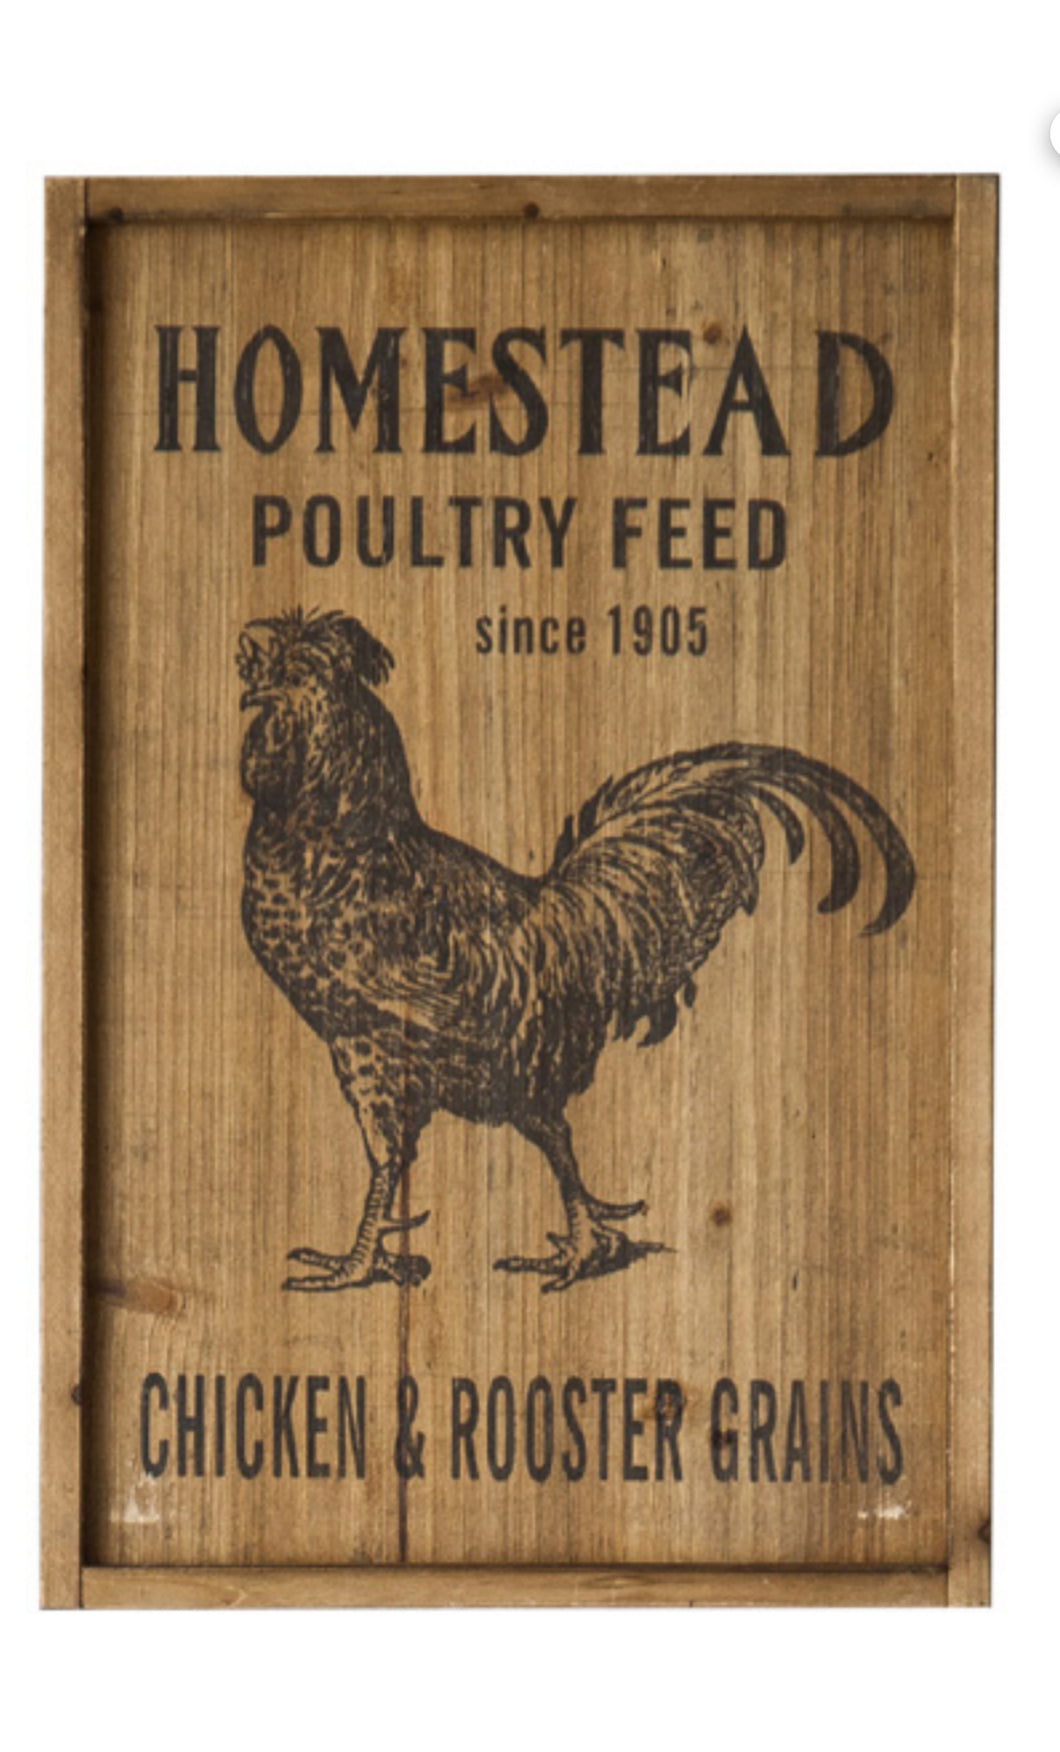 Homestead poultry feed sign